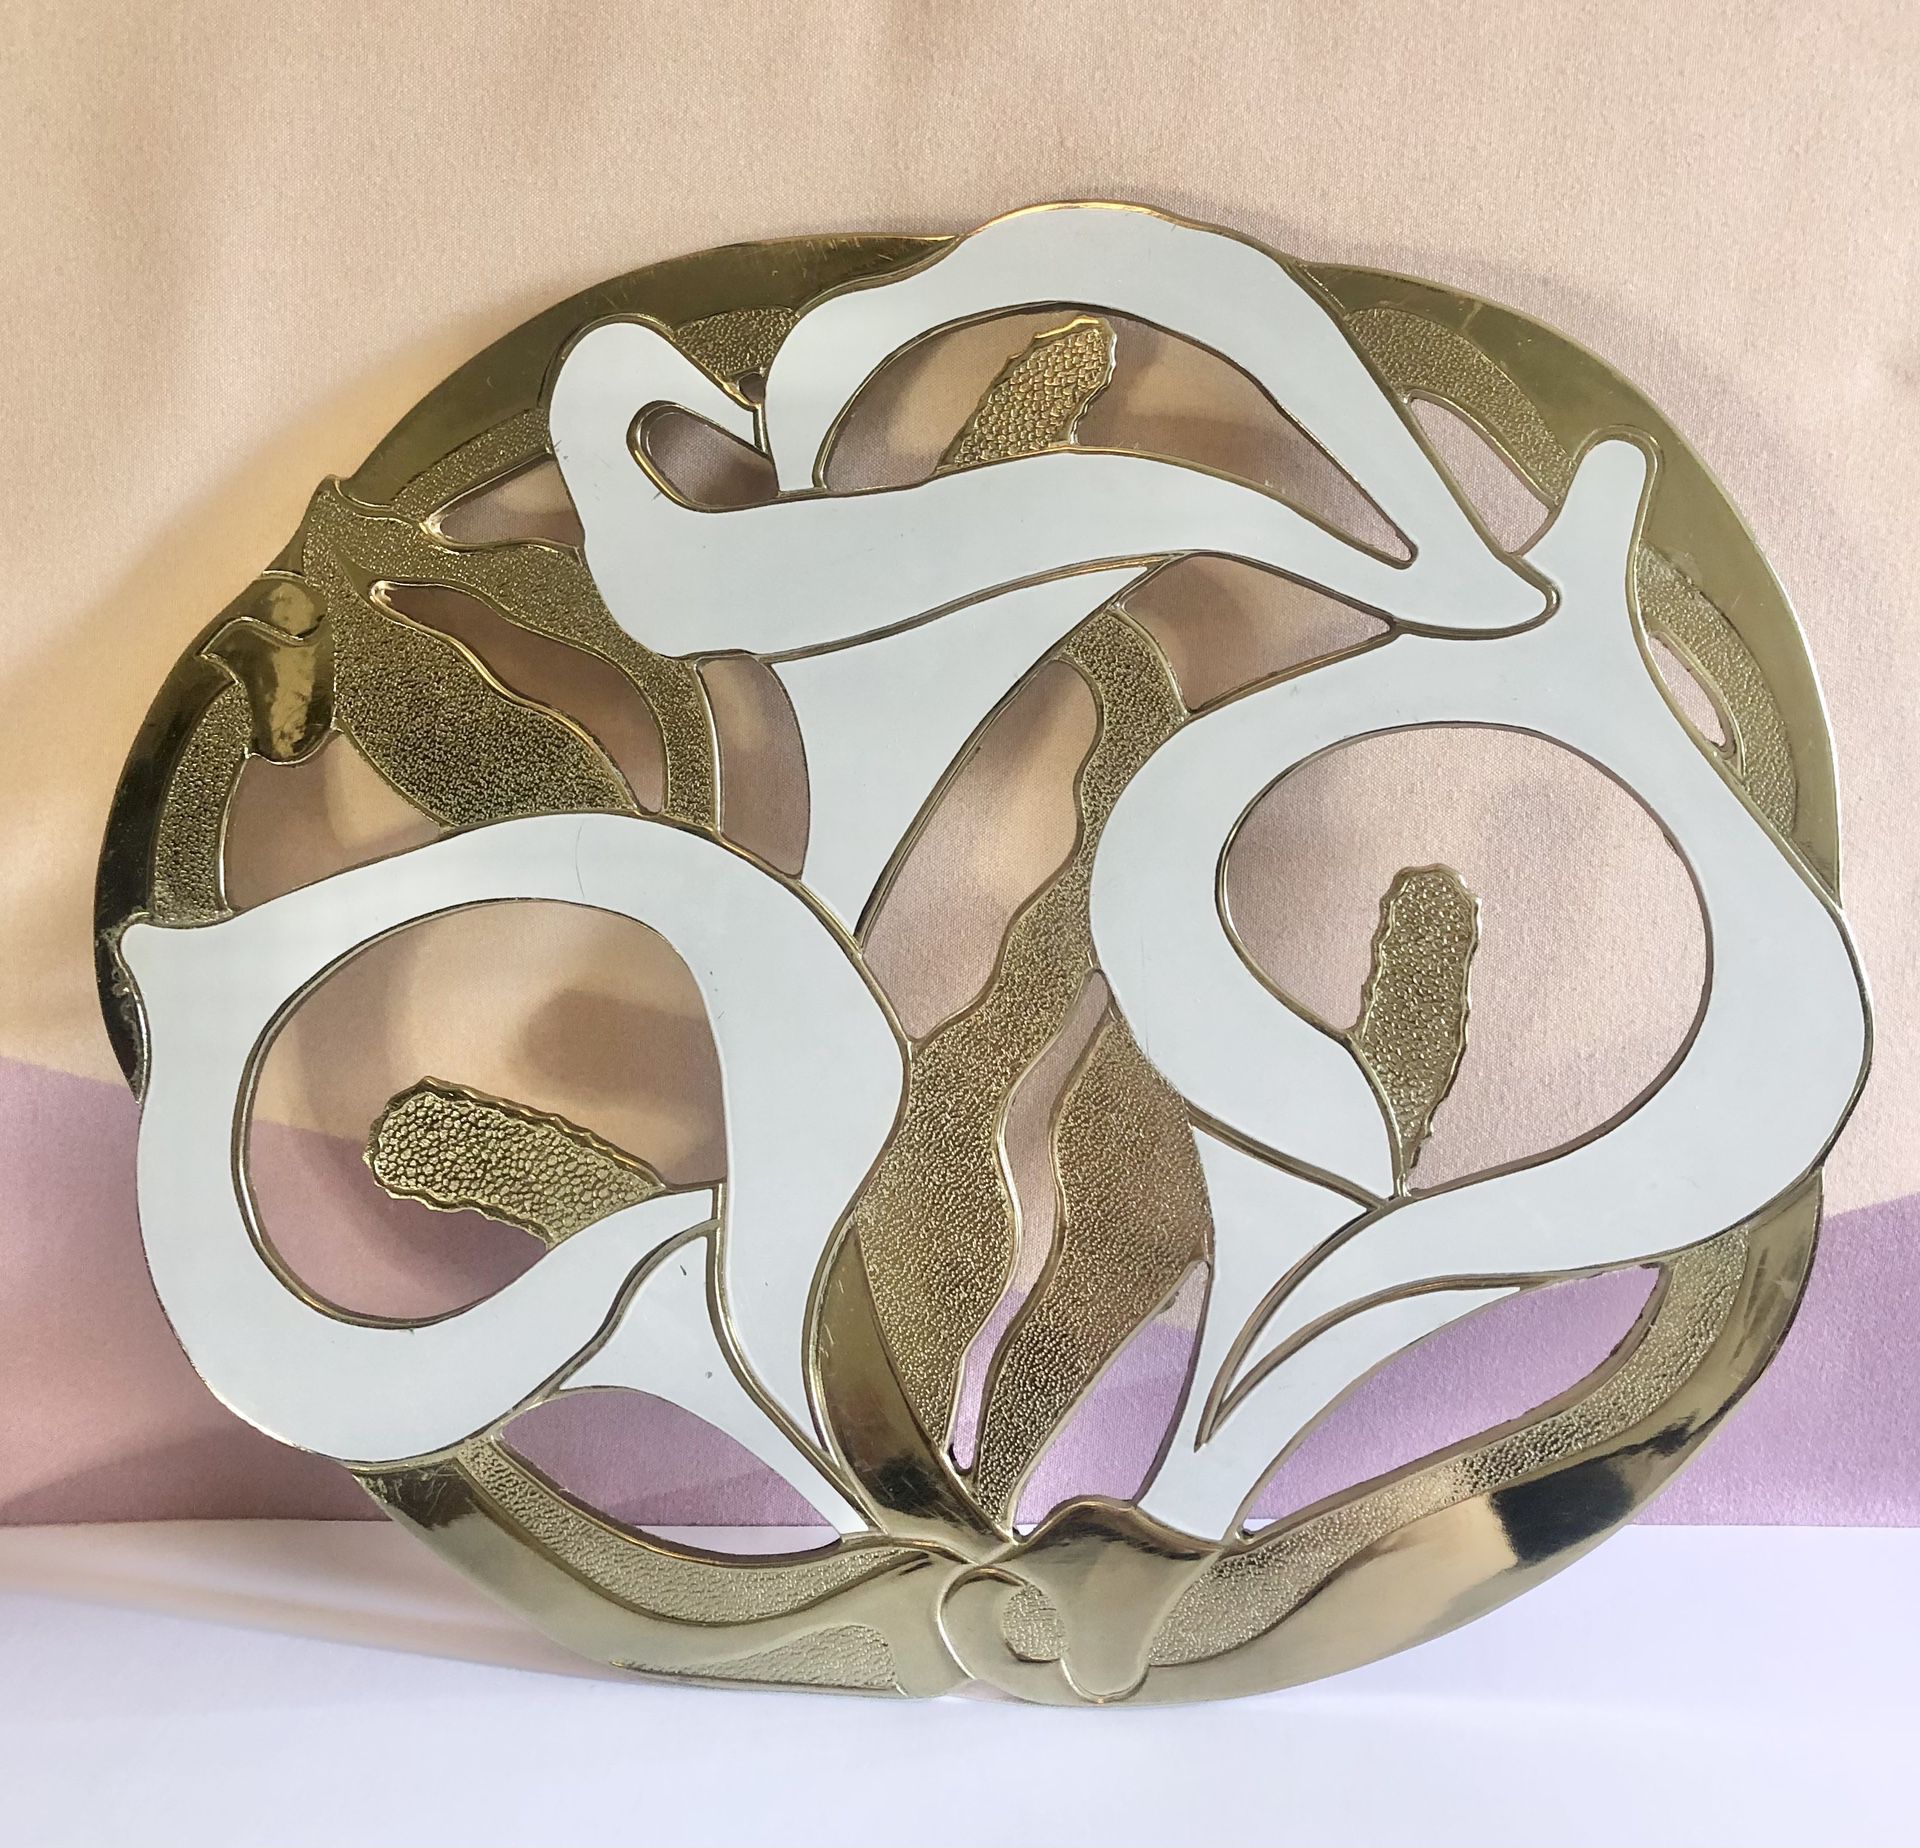 Vintage 1970s Rogers Brass and White Calla Lily Trivet/Hot Pad by Oneida